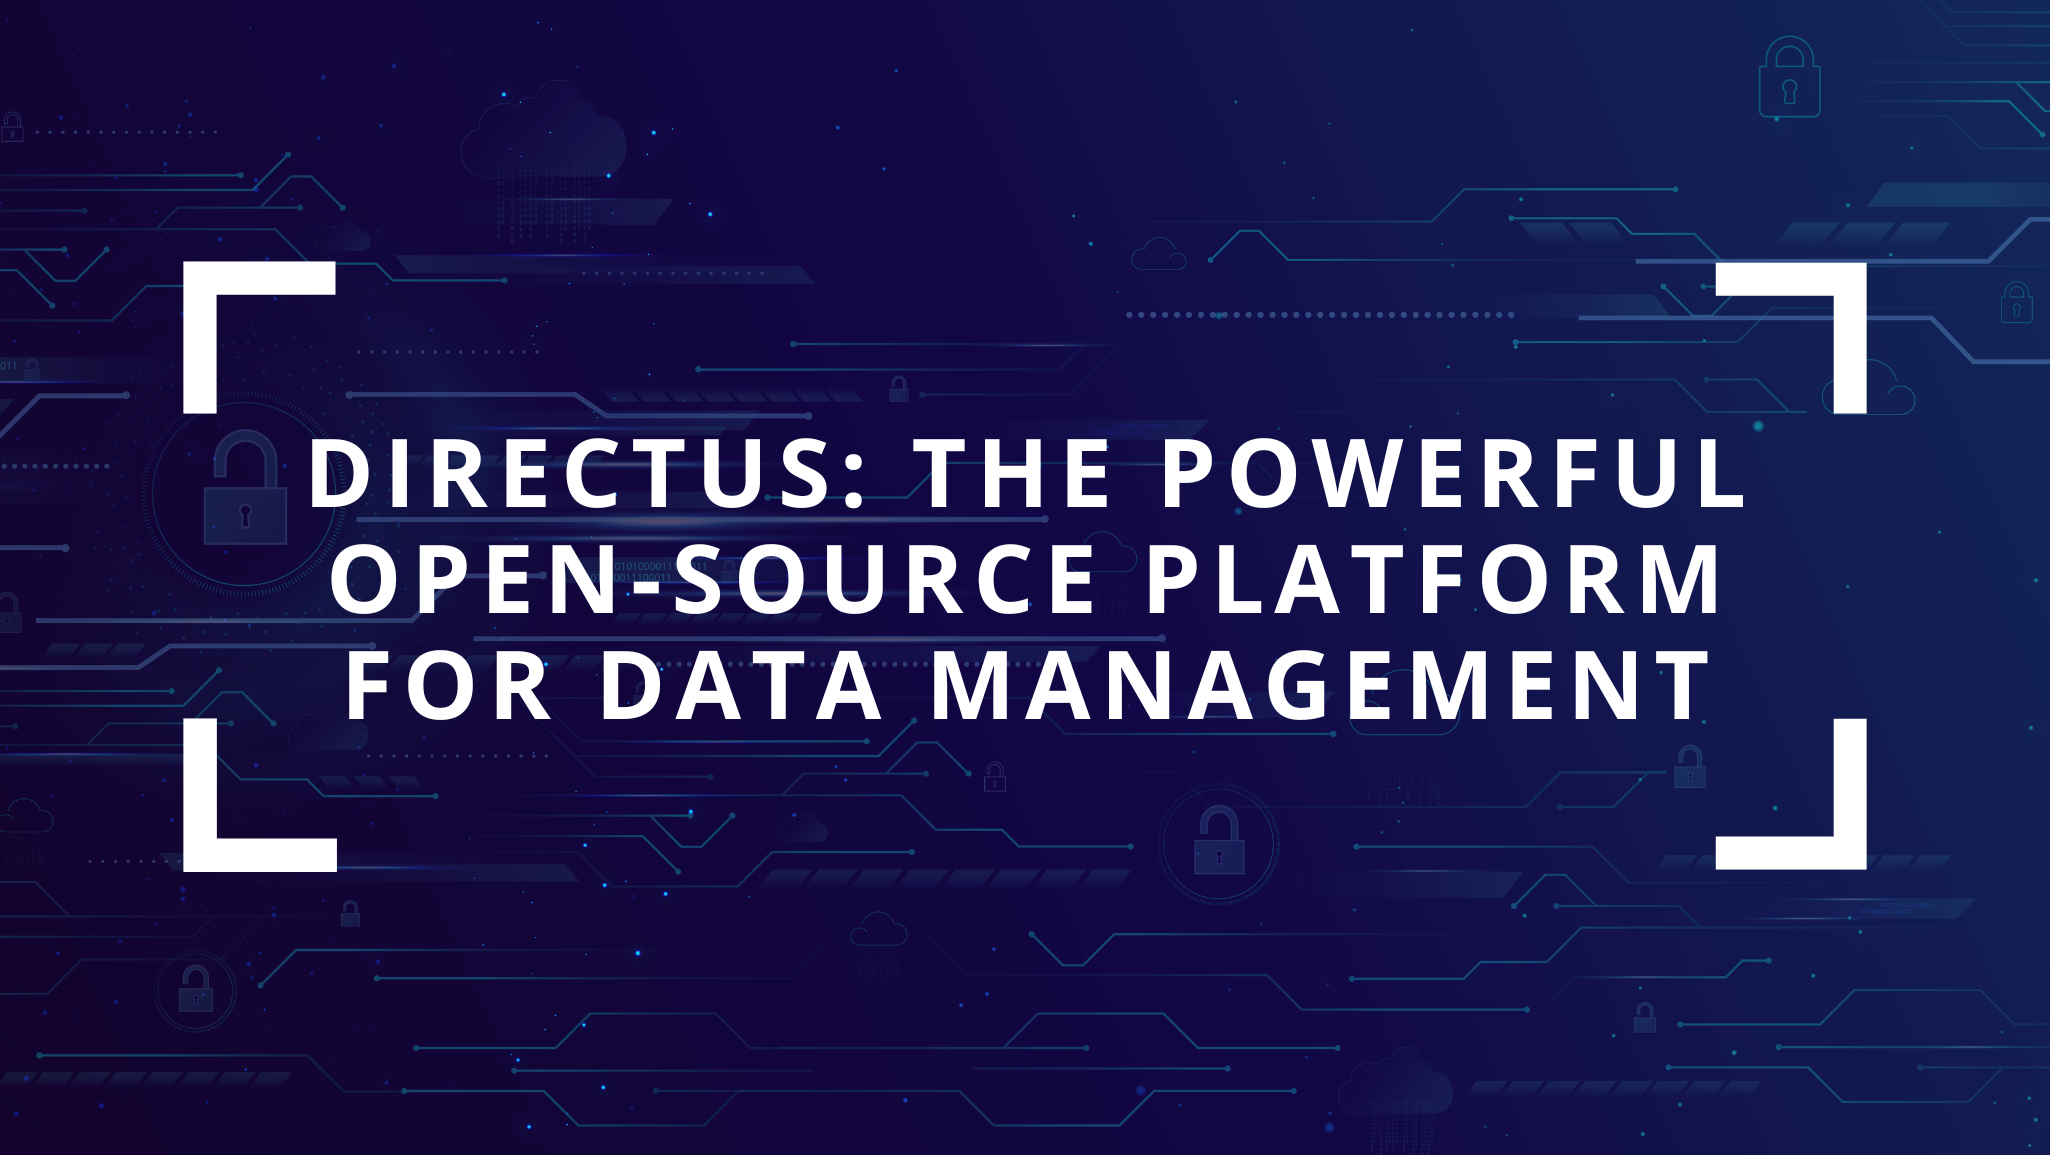 Directus: The Powerful Open-Source Platform for Data Management